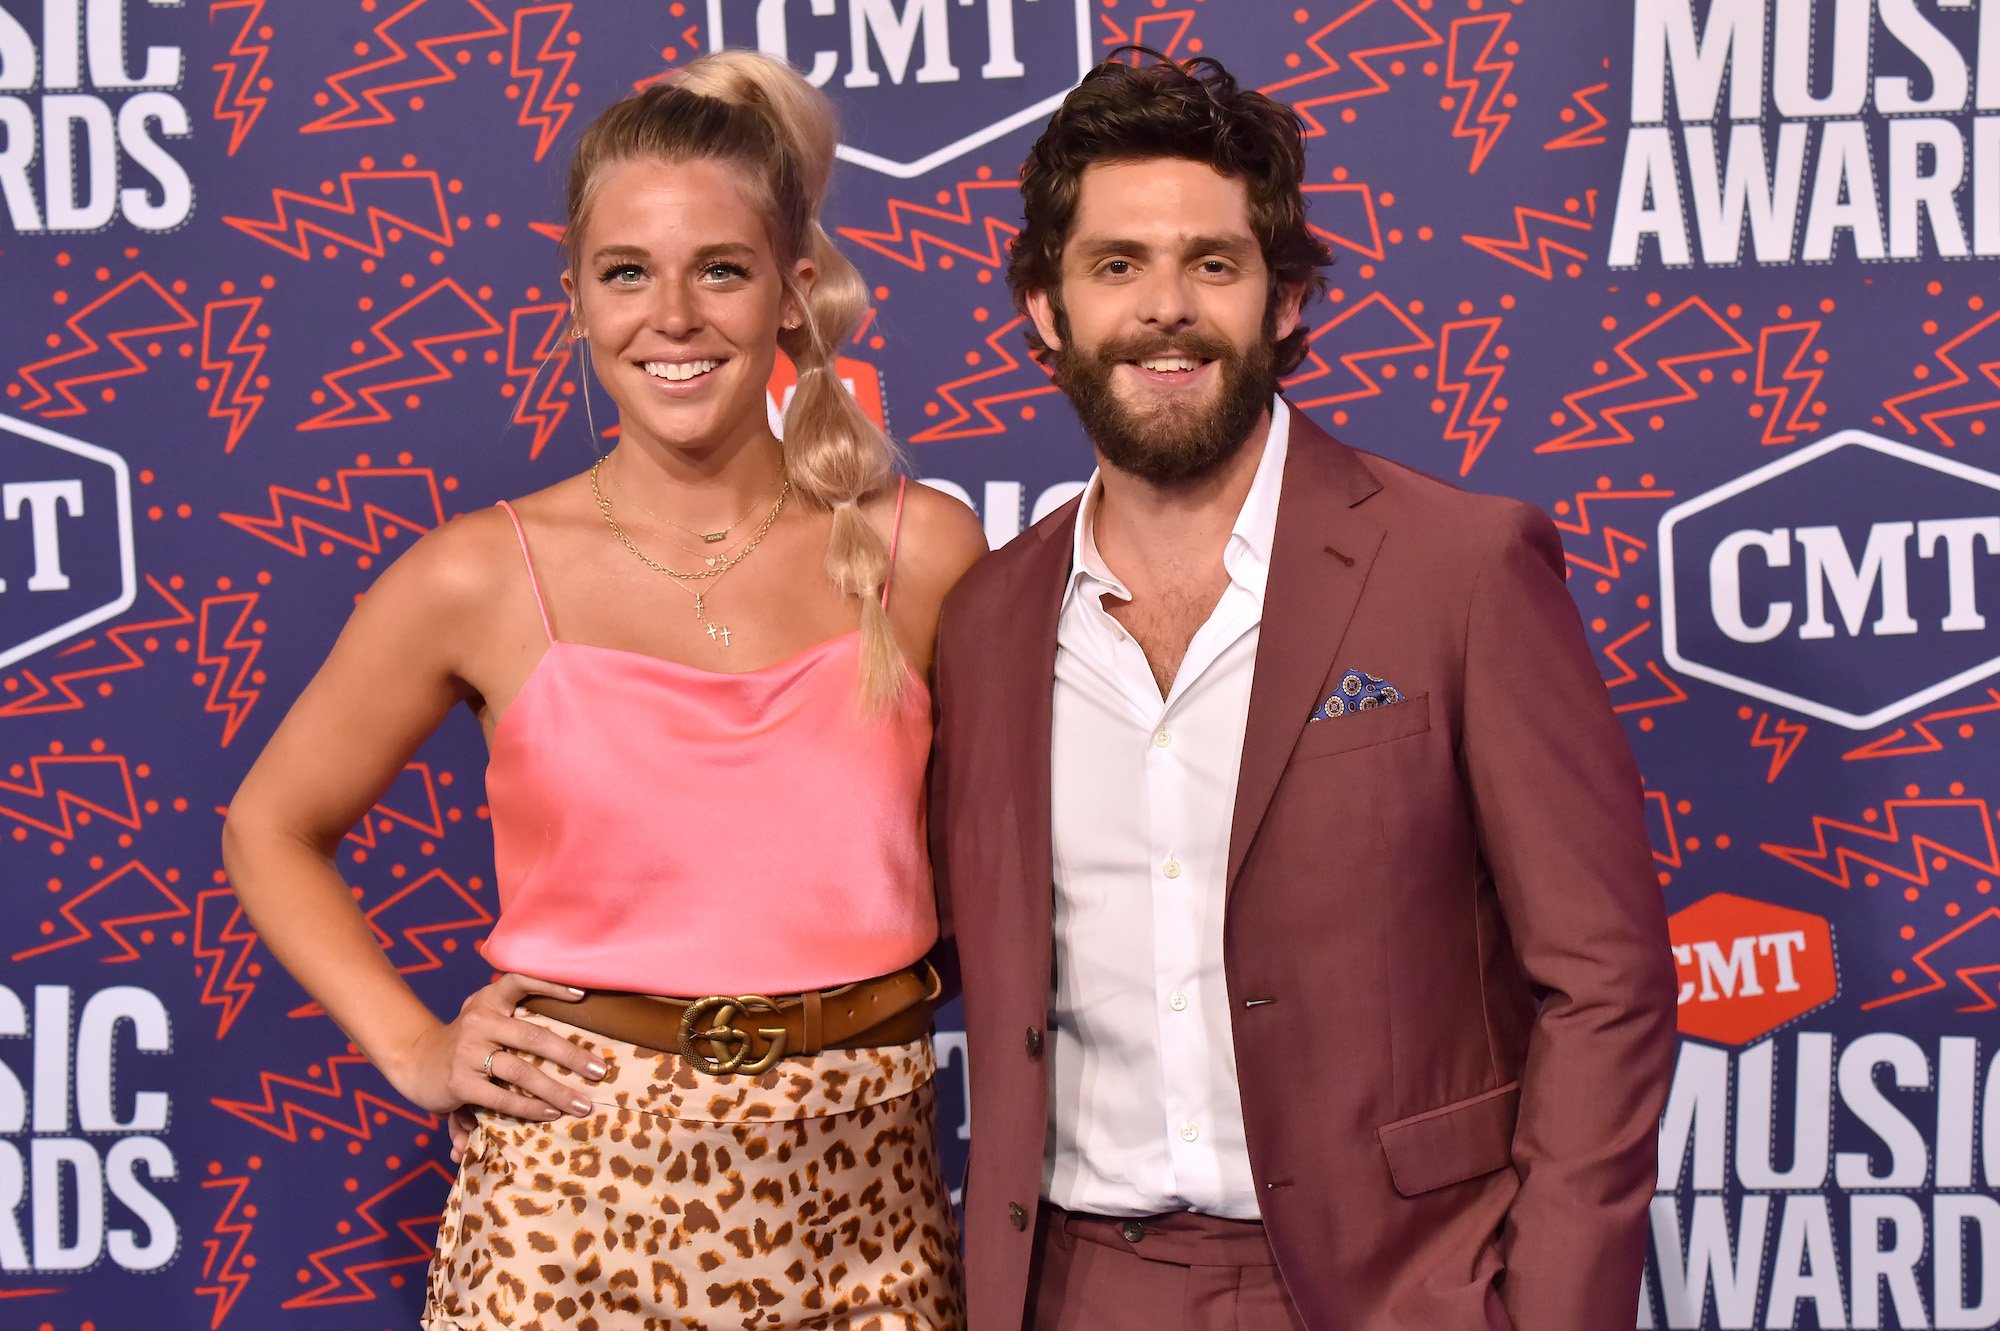 (L-R) Laura Atkins and Thomas Rhett smiling in front of a blue background